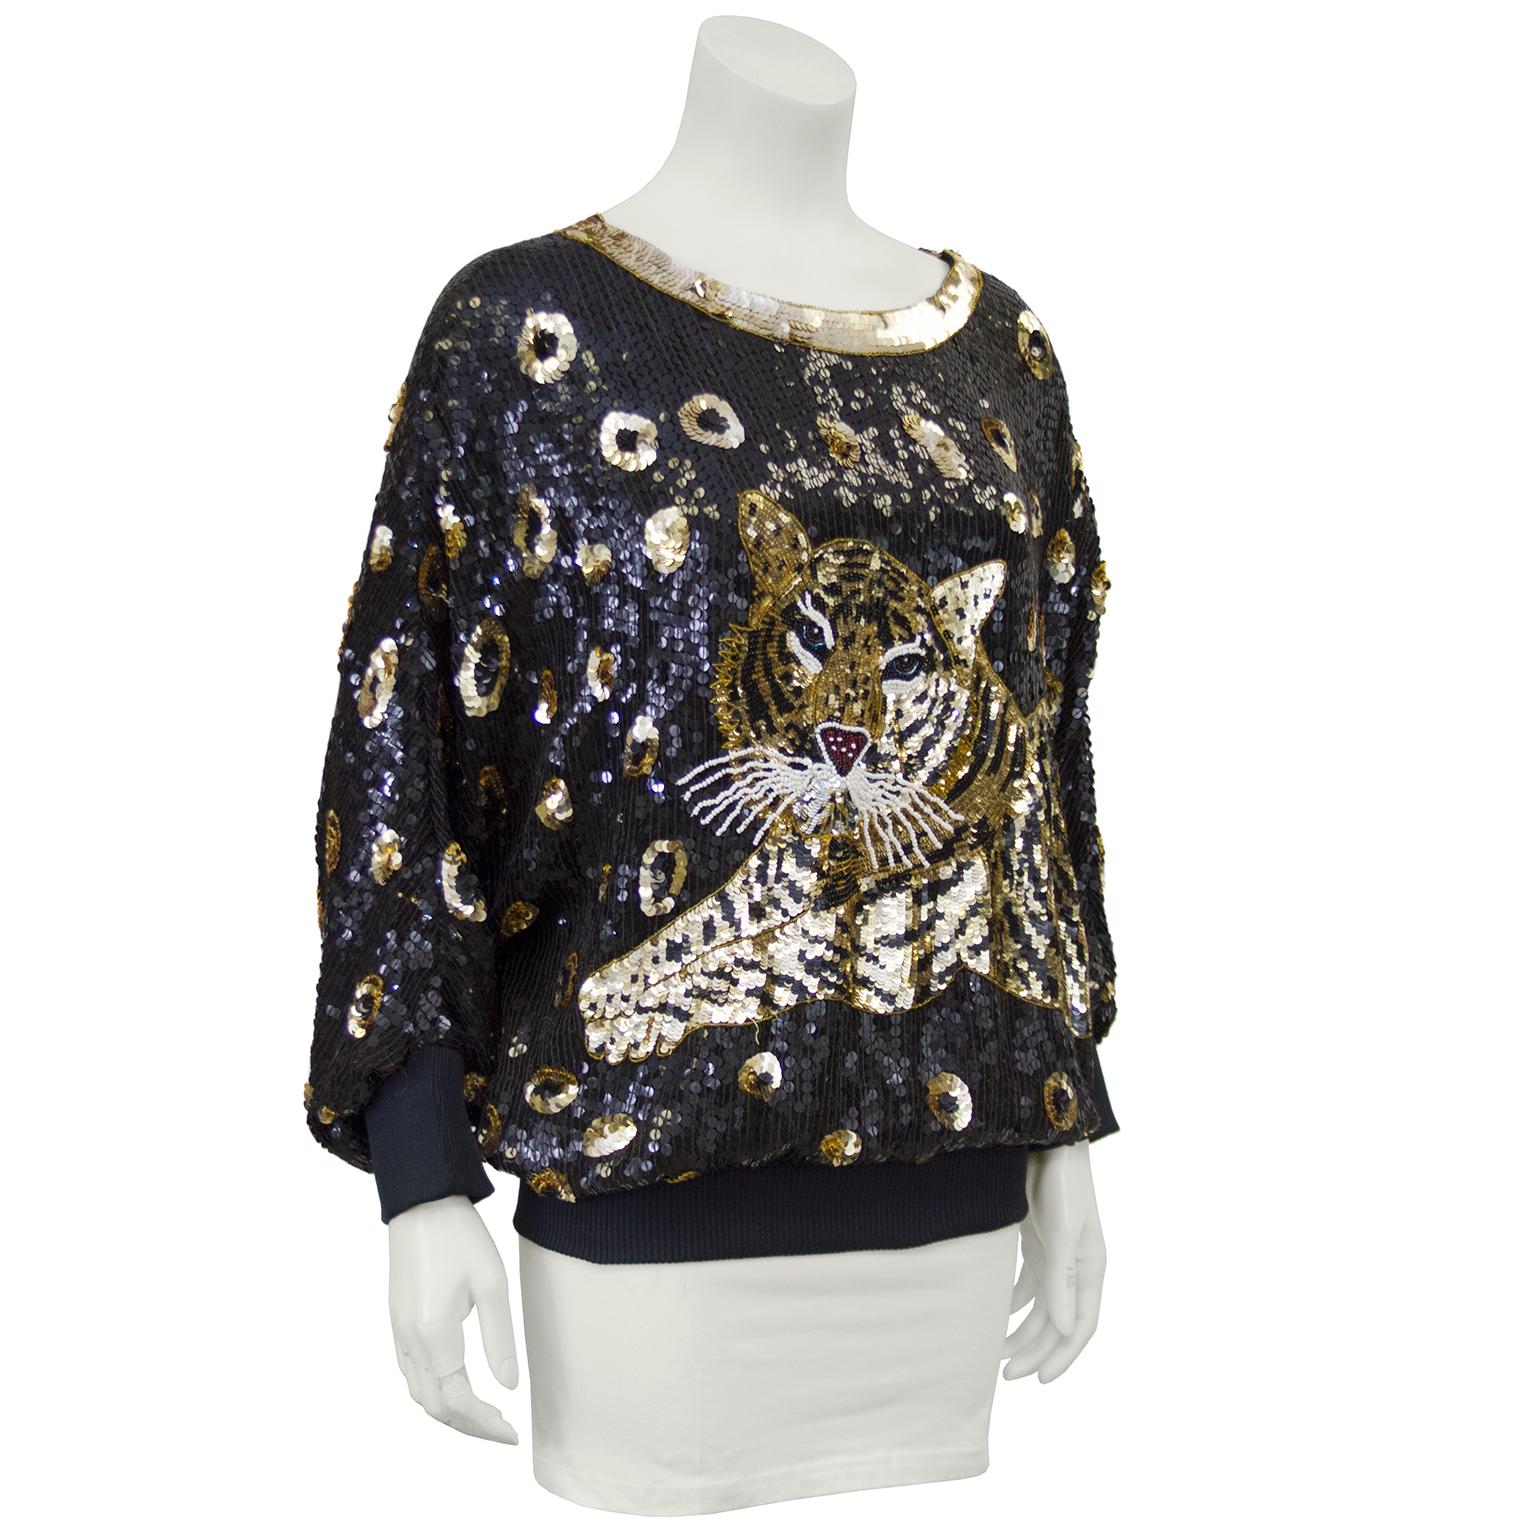 1980s sequin from the department store label, I. Magnin. The intricately sequinned top features a tiger lounging on a black back ground with irregular, cheetah  print-like gold sequin dots. The wide ribbed knit hem is meant to be worn on the hips